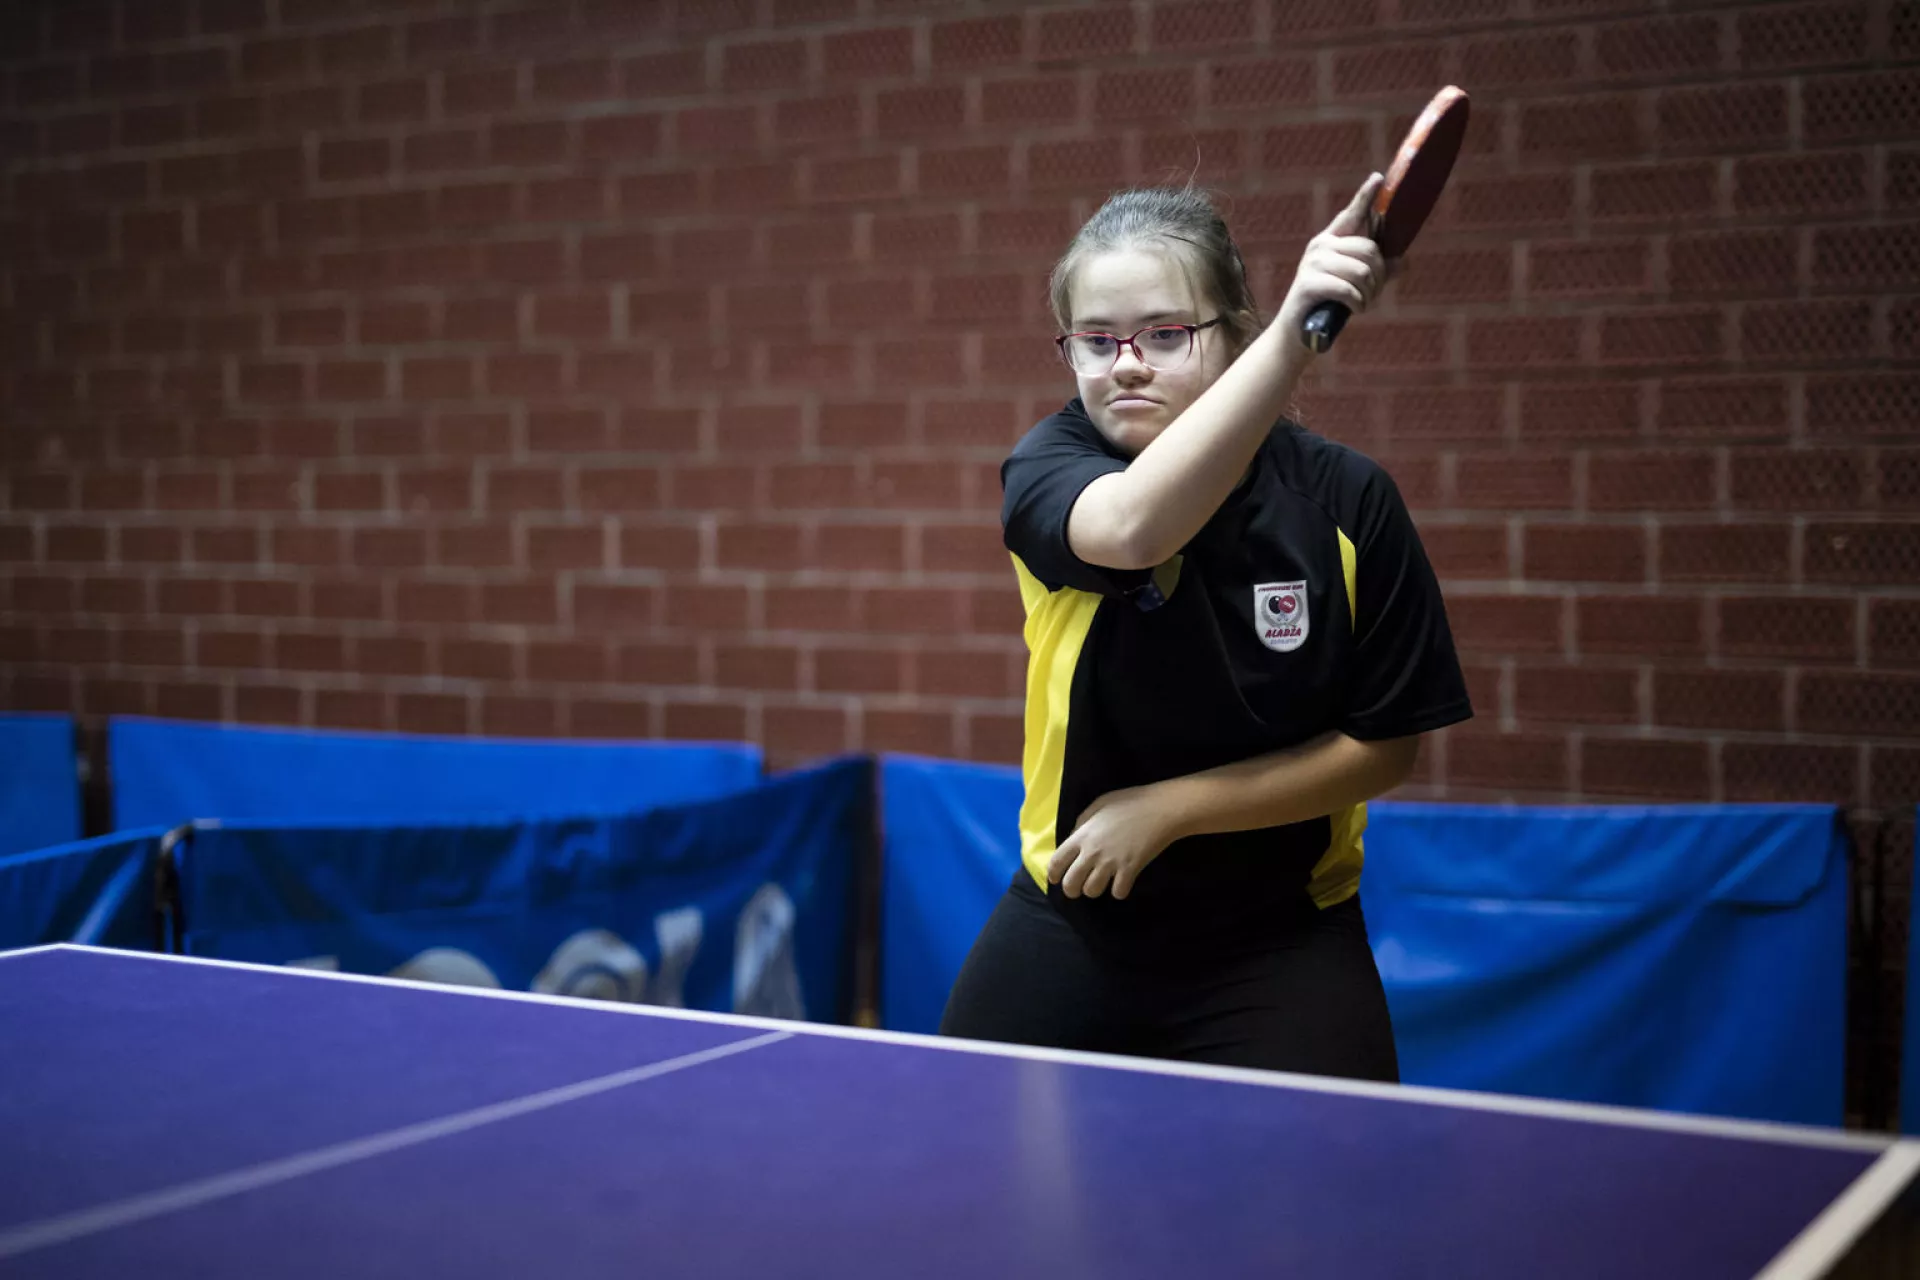 Edna plays table tennis at school.